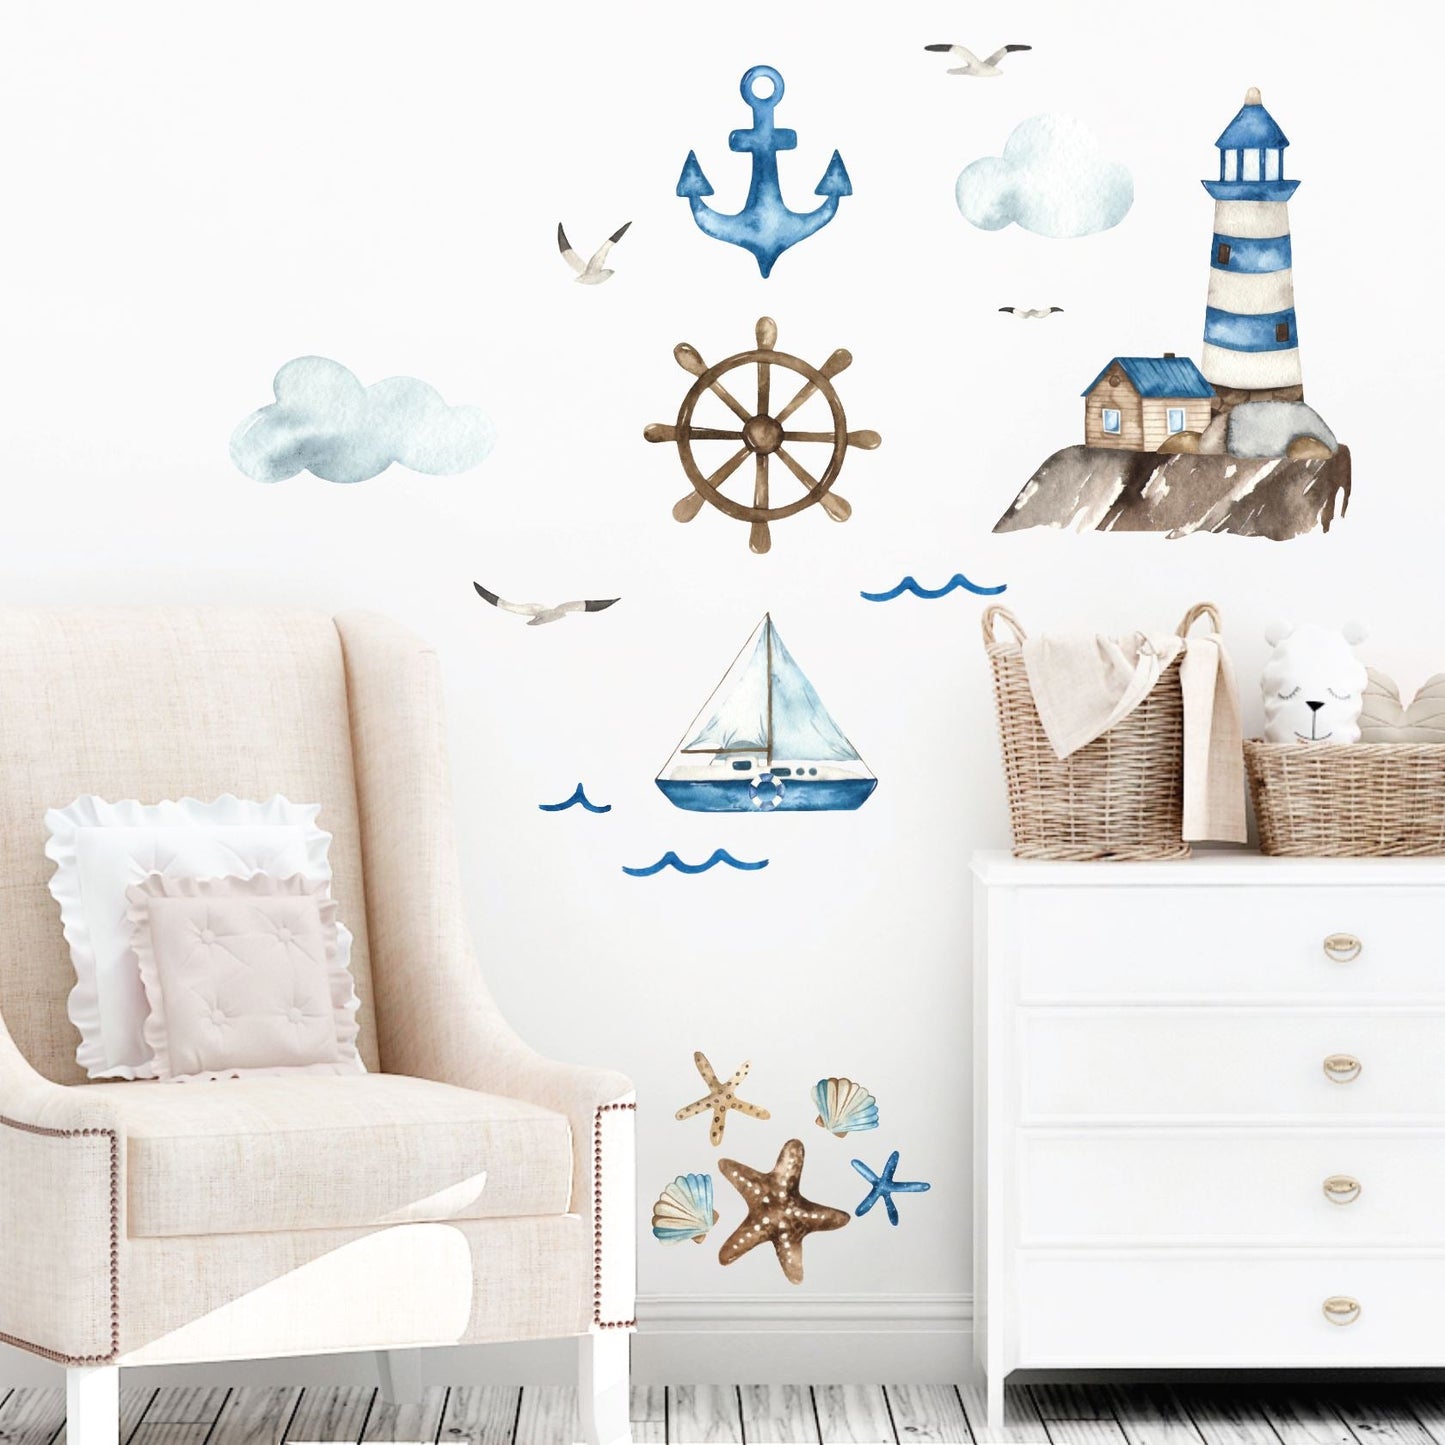 Nautical Wall Decals | Watercolor Coastal Wall Stickers | Lighthouse, Sailboat, Anchor - Picture Perfect Decals